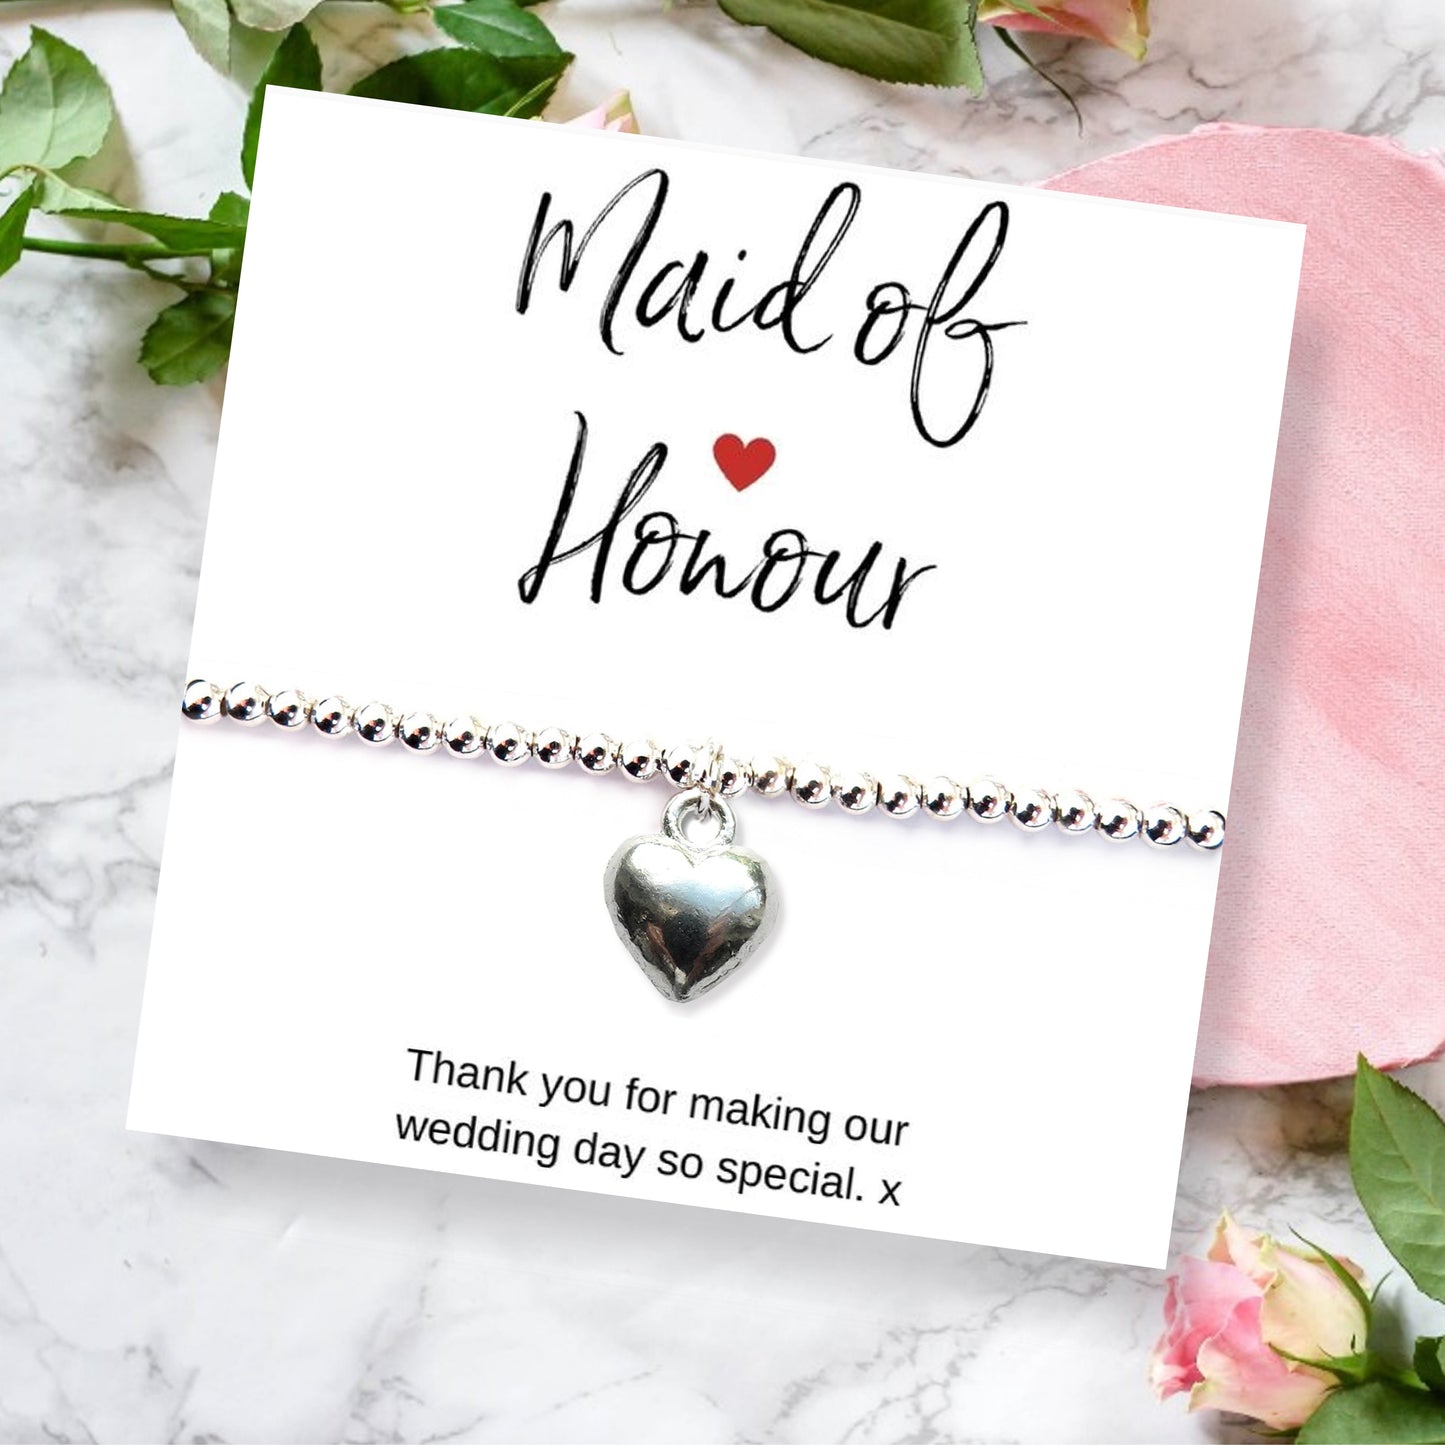 Maid of Honour Heart Bracelet & Thank You Card